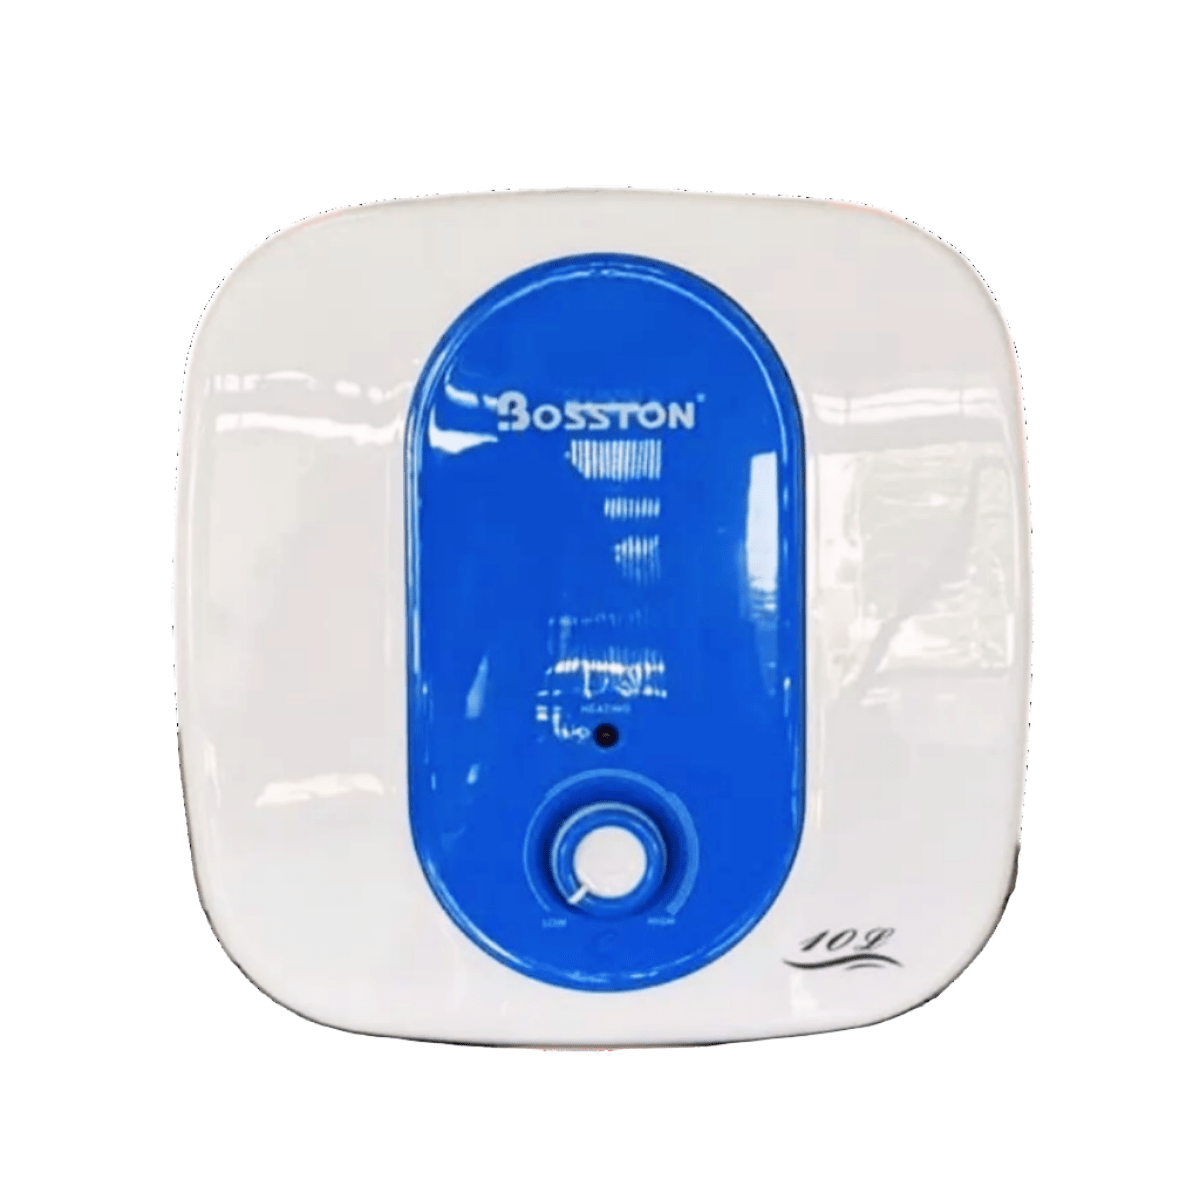 Buy Bosston Storage Water Heater - 10L, 15L & 30L | Shop at Supply Master Accra, Ghana Water Heater Buy Tools hardware Building materials